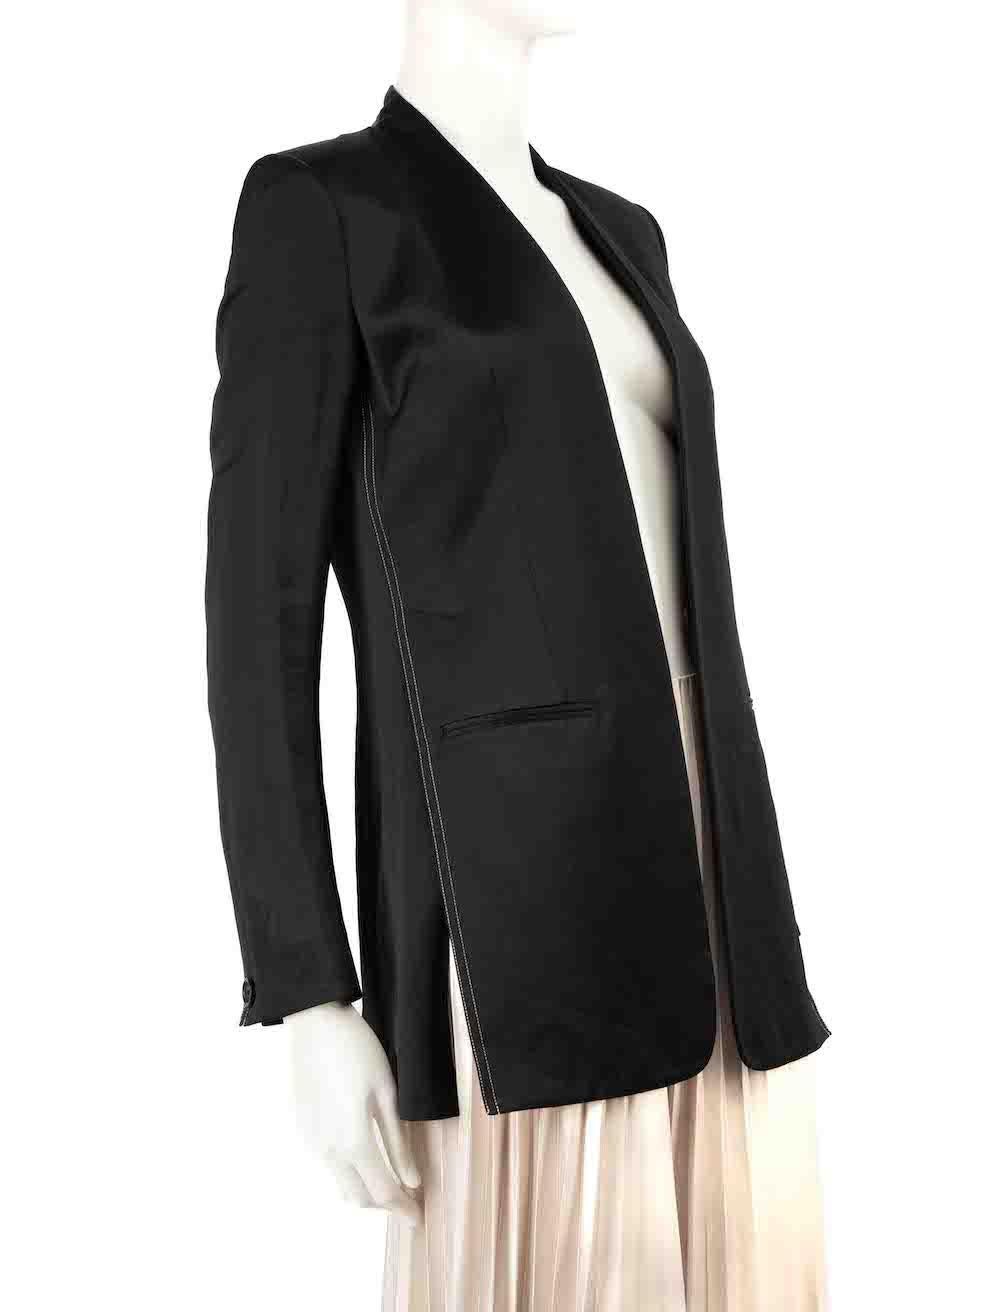 CONDITION is Very good. Hardly any visible wear to blazer is evident on this used Helmut Lang designer resale item.
 
 
 
 Details
 
 
 Black
 
 Viscose
 
 Blazer
 
 Collarless
 
 Contrast stitch
 
 Button up fastening
 
 Shoulder pads
 
 Buttoned